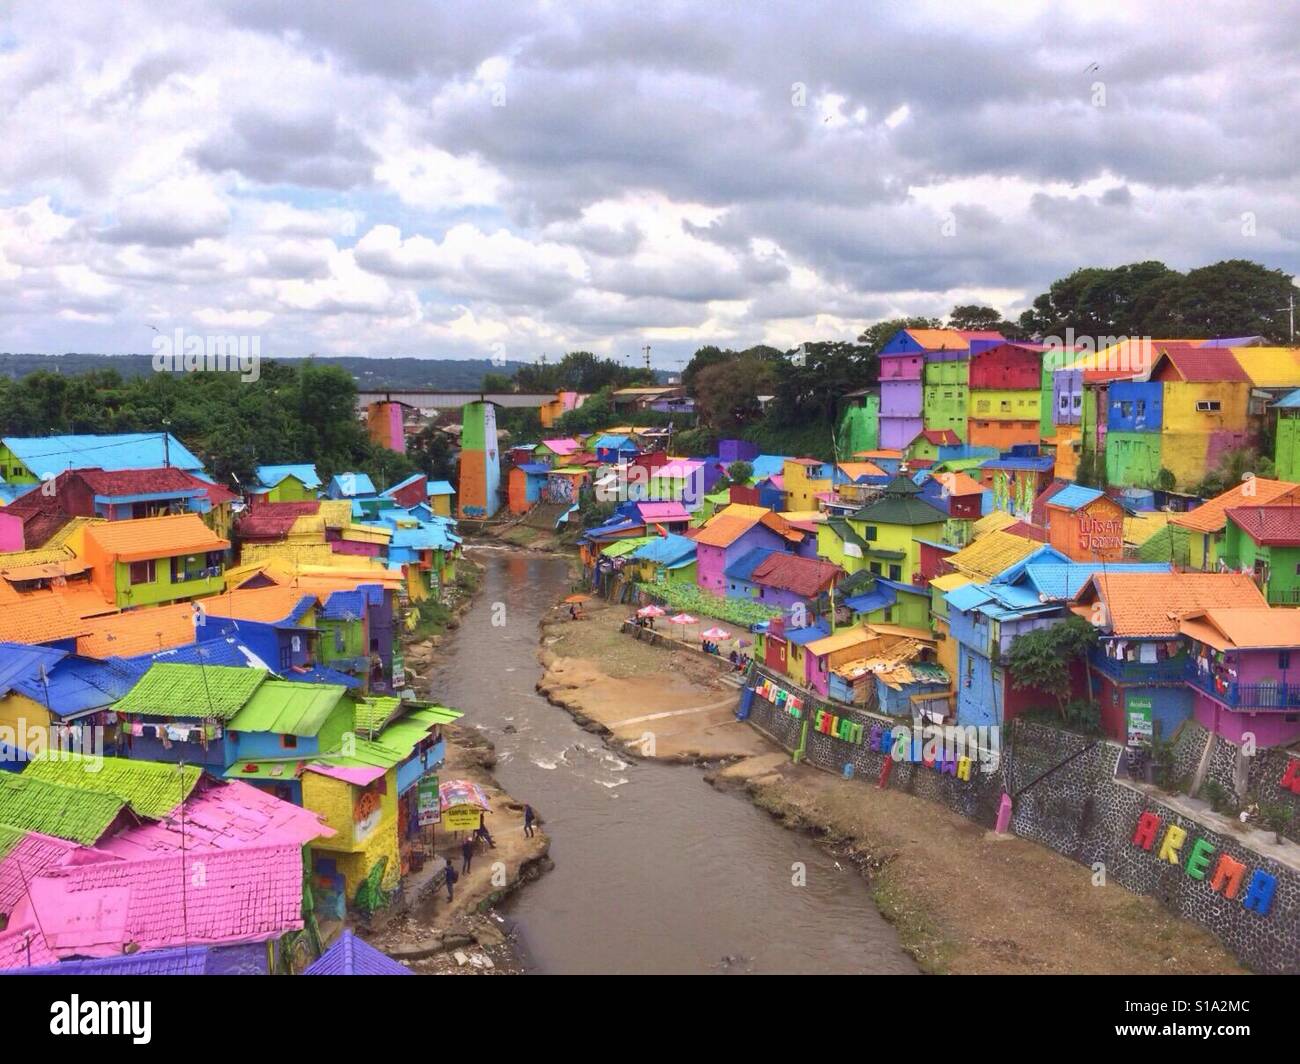  Malang  s Colorful Suburb In Malang City Indonesia  Stock 